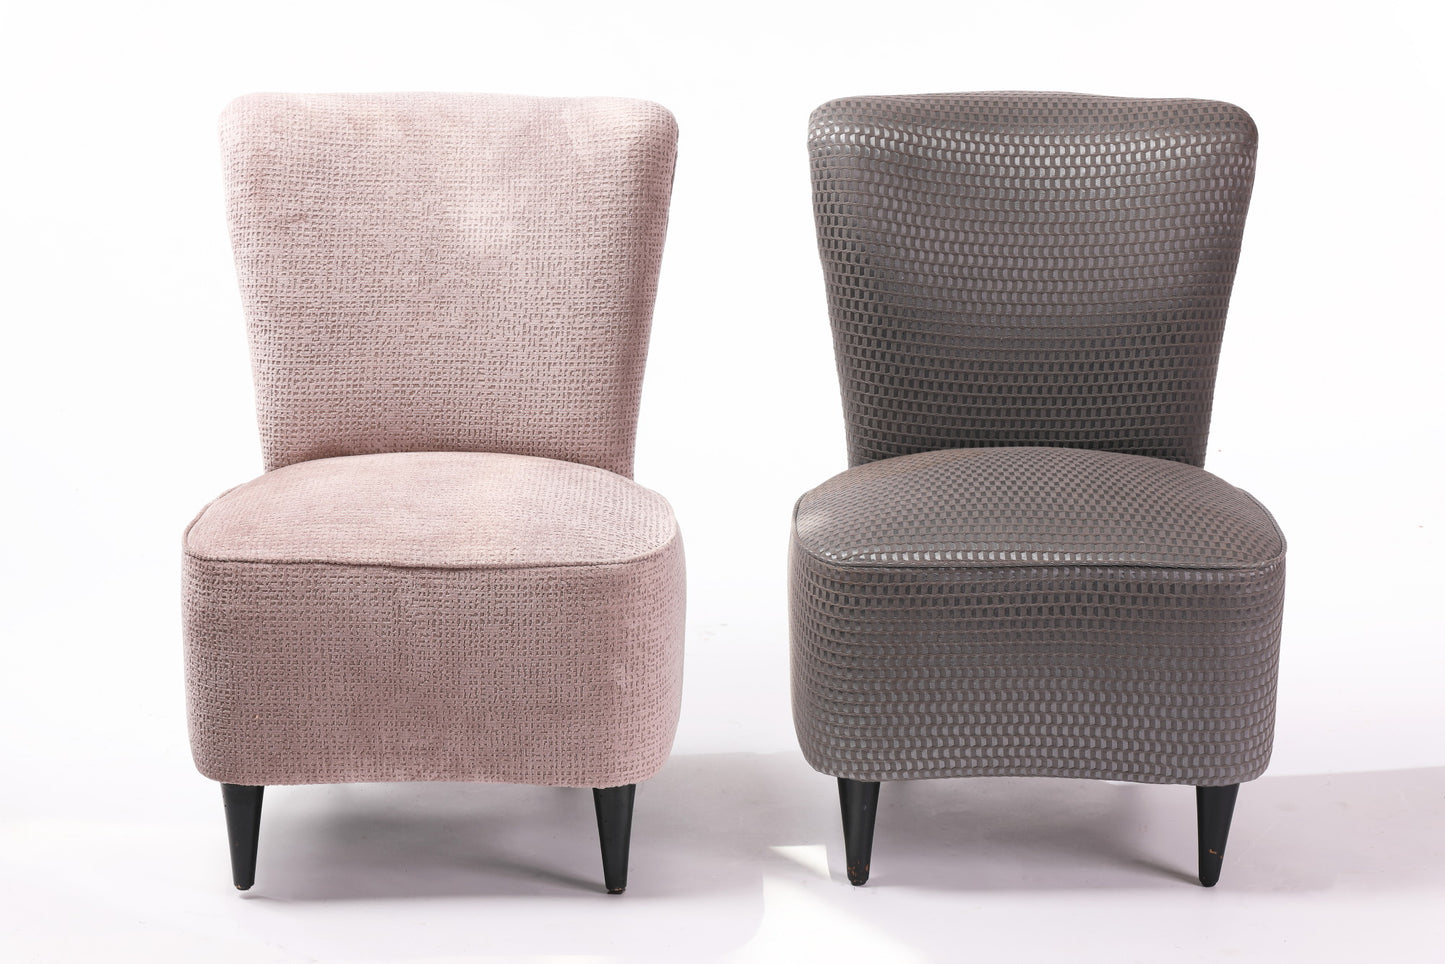 Pair of bedroom armchairs from the 50s in pink and gray satin and velvet